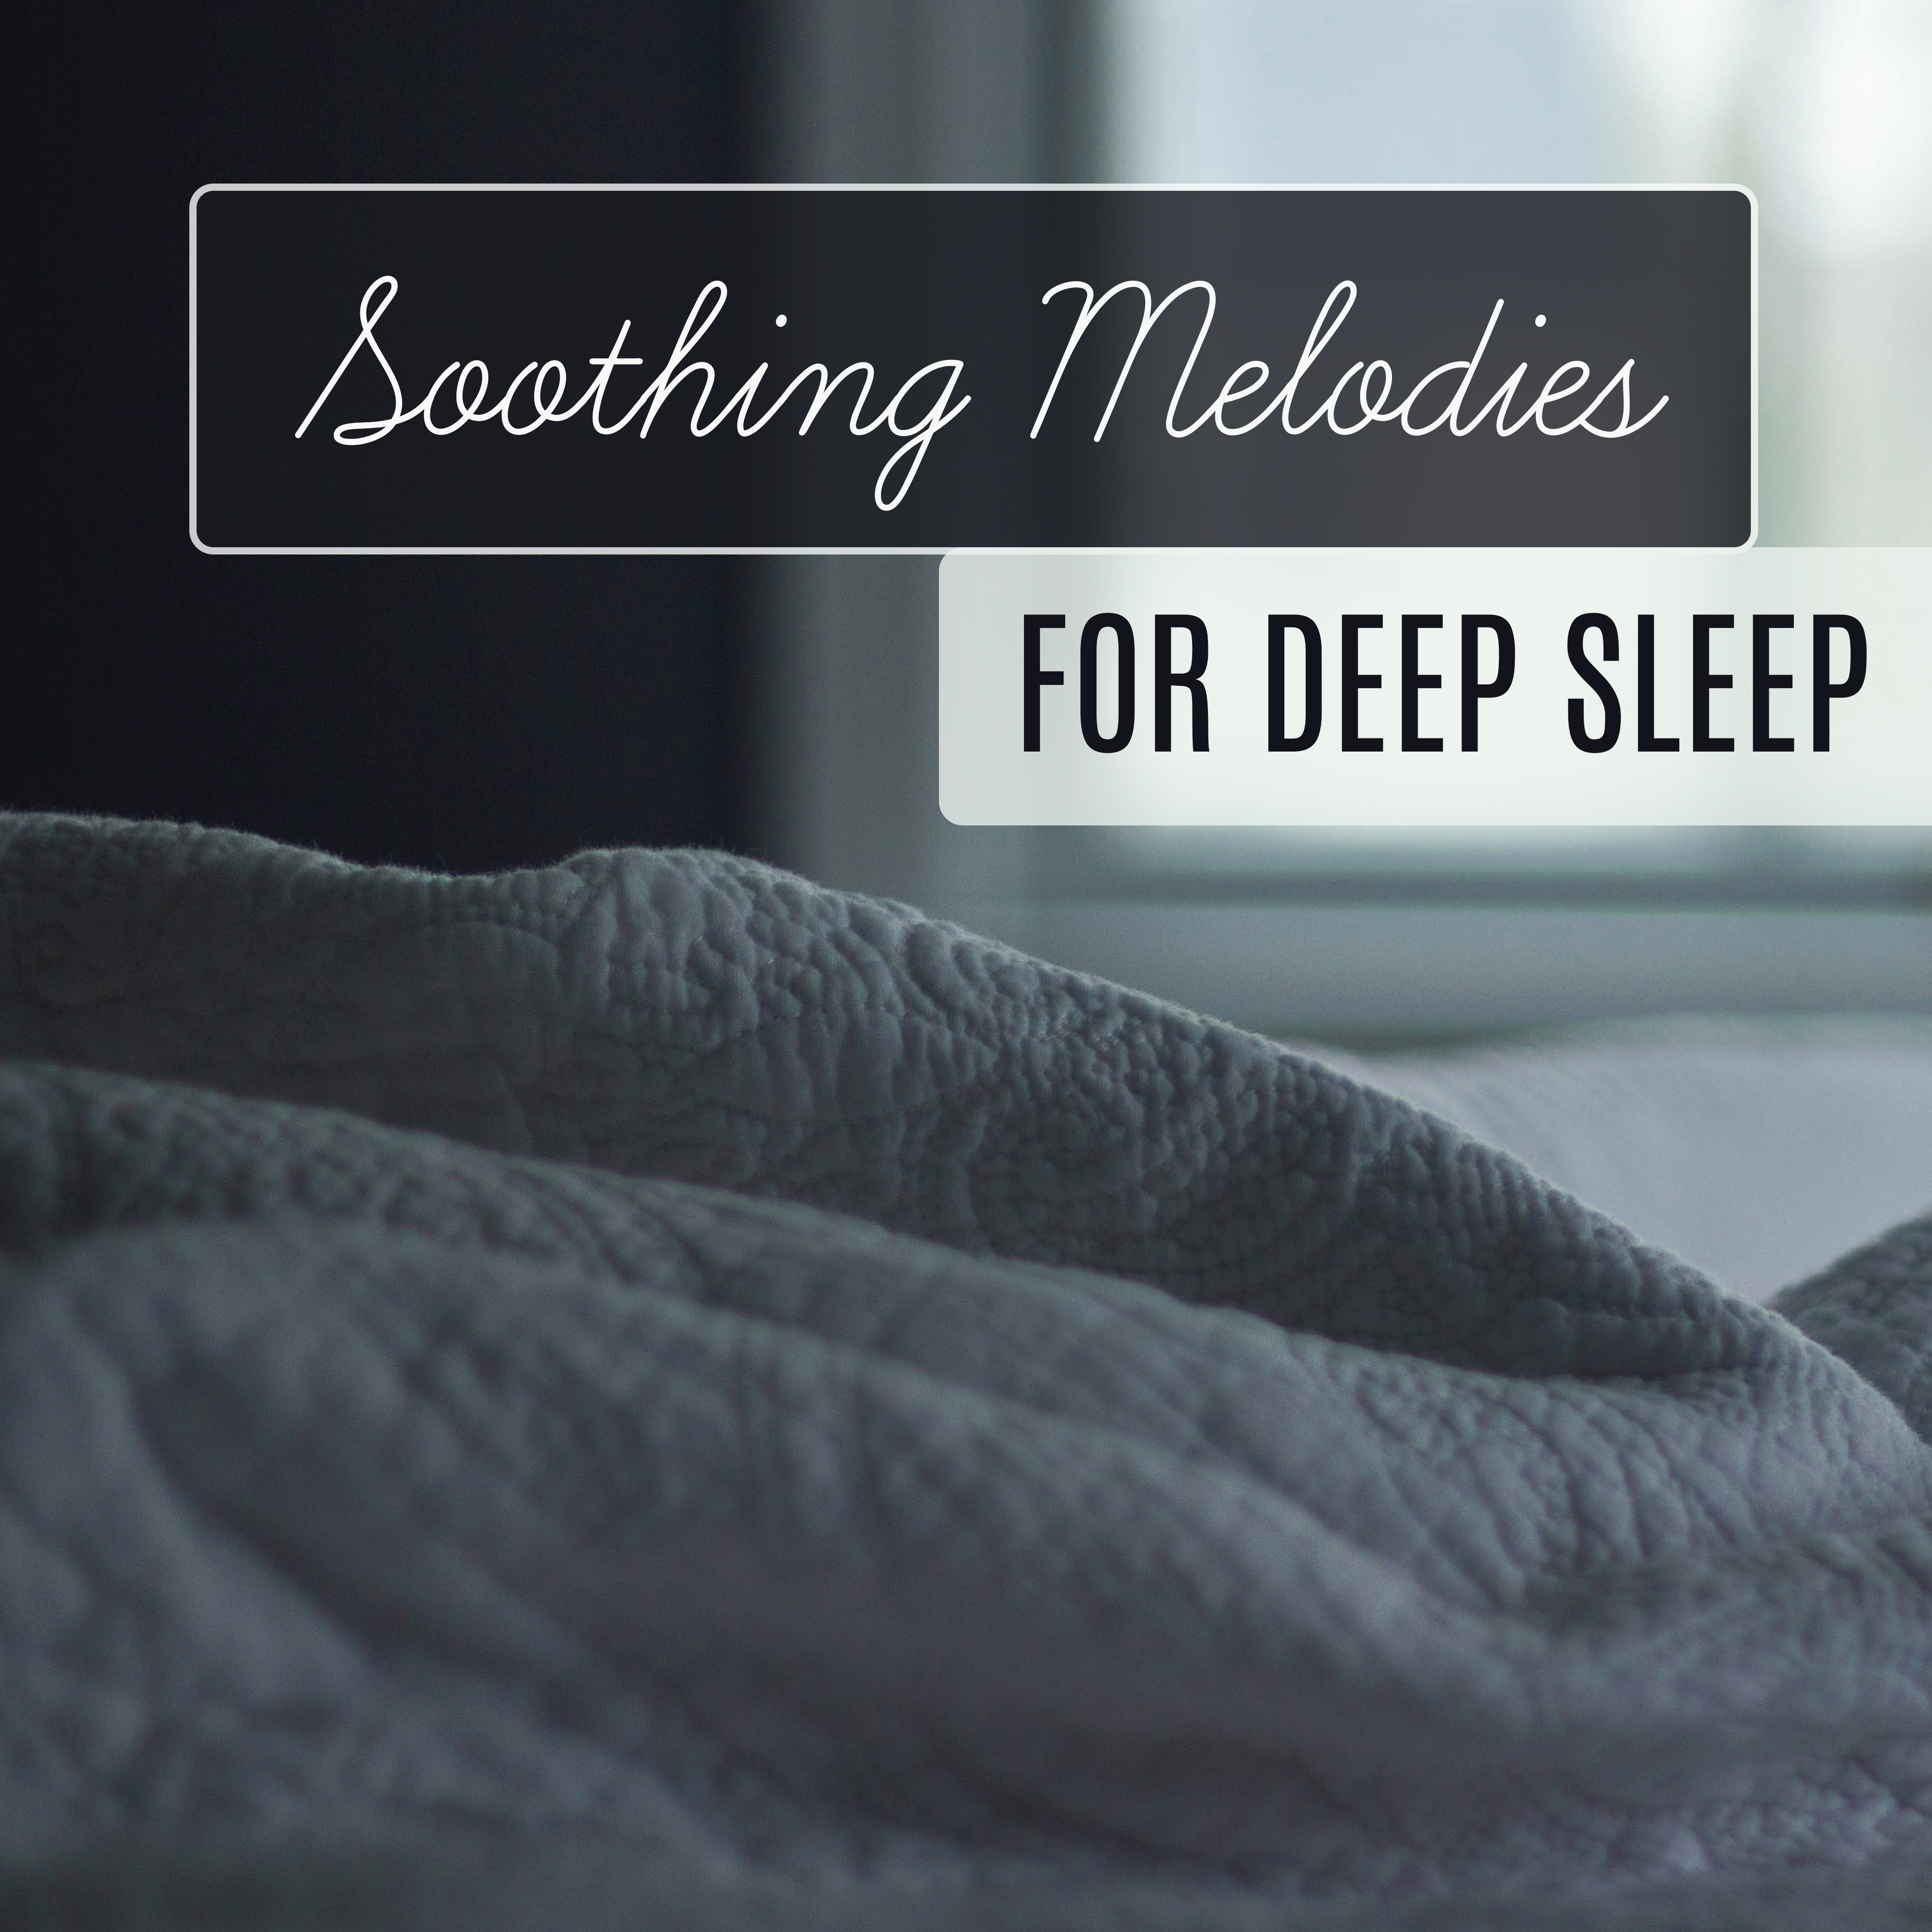 Soothing Melodies for Deep Sleep – Relaxation Sounds to Bed, Healing Lullabies, Tranquil Sleep, Night Songs